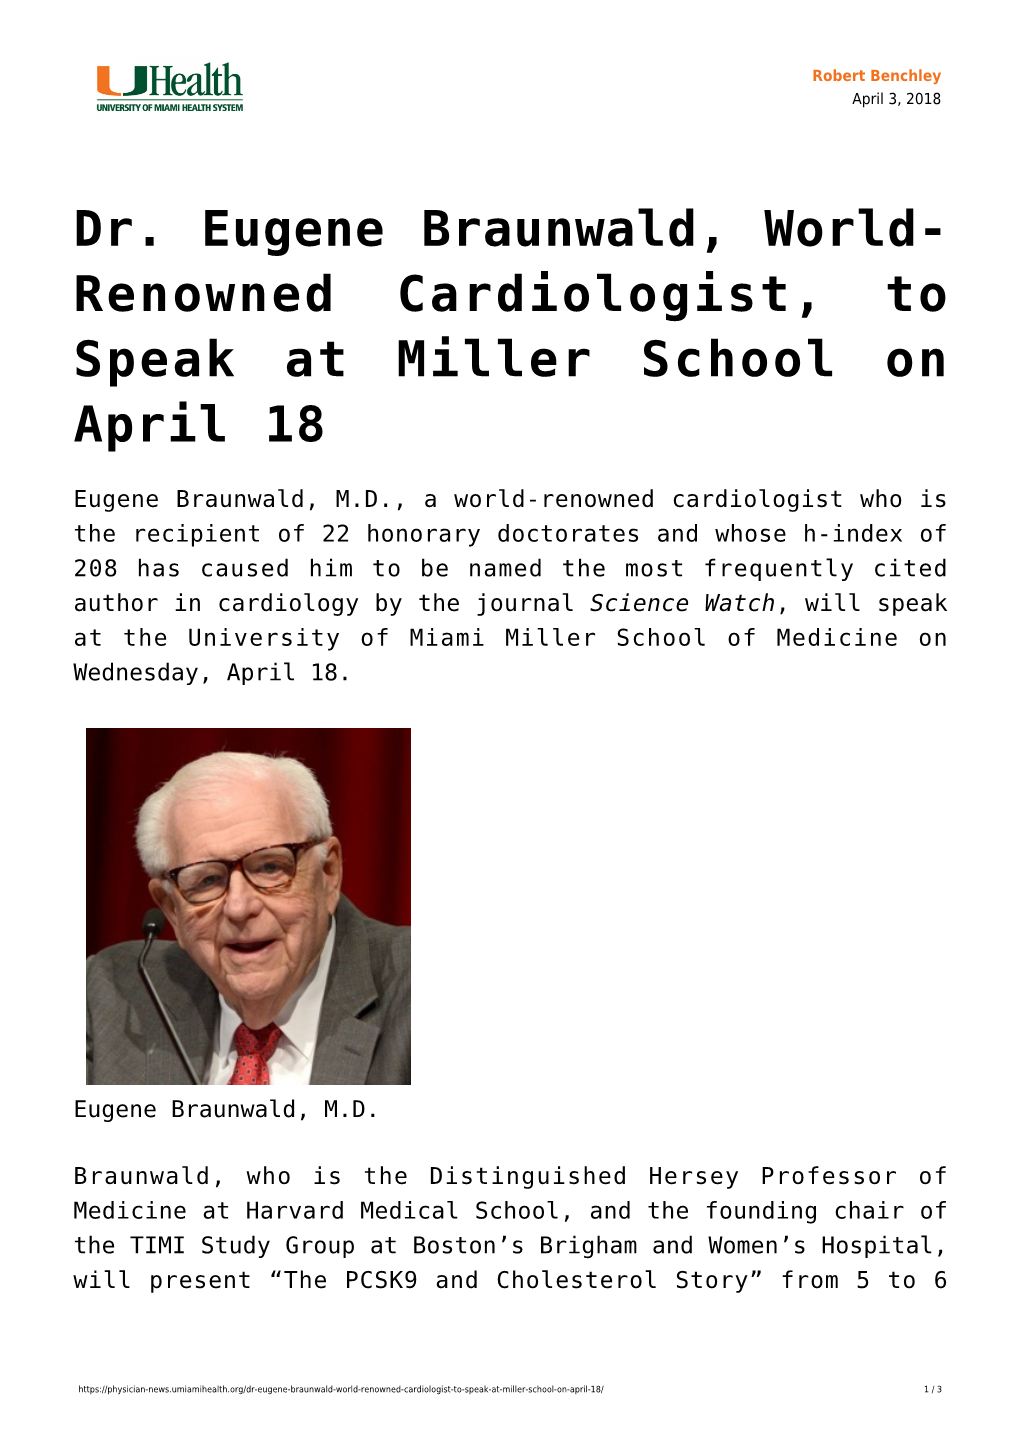 Dr. Eugene Braunwald, World-Renowned Cardiologist, To